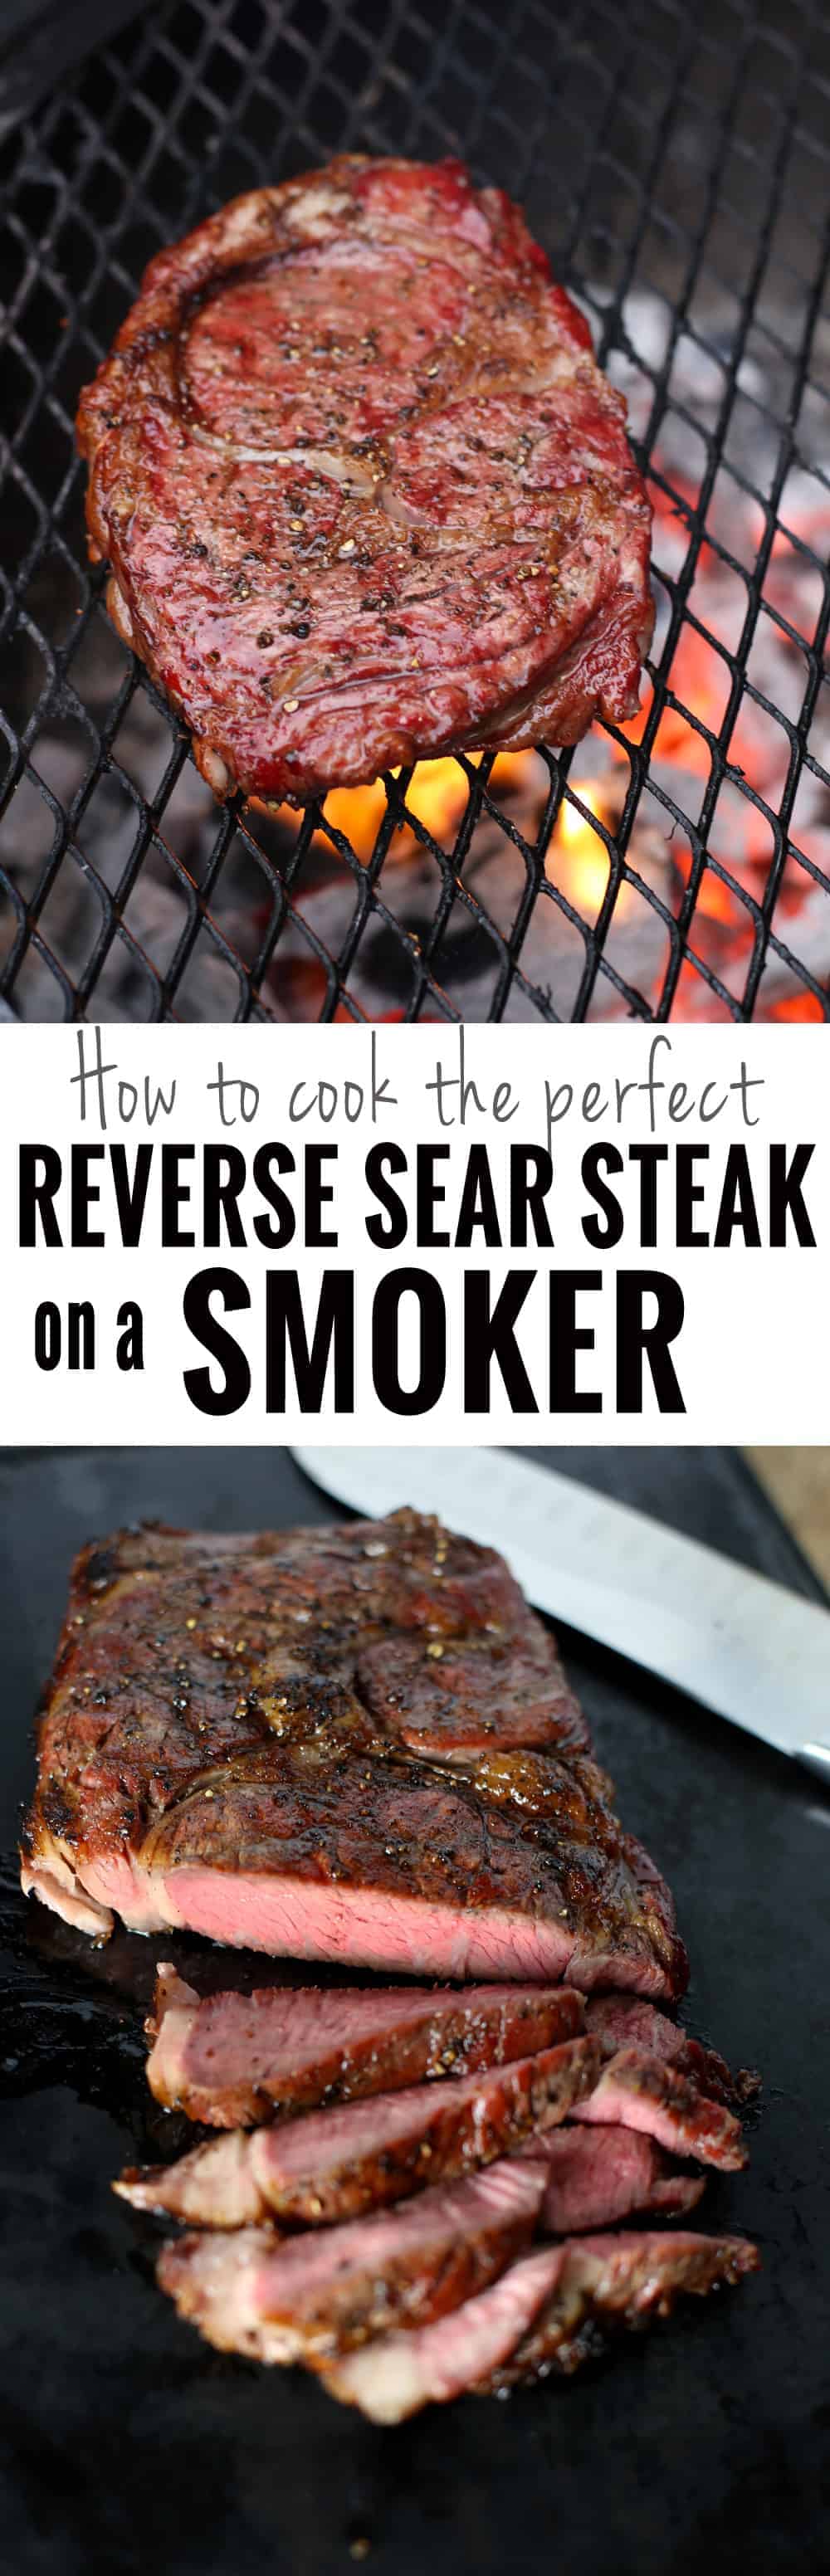 https://www.vindulge.com/wp-content/uploads/2016/05/The-Perfect-Reverse-Sear-Steak-using-your-Smoker.-Using-this-method-you-can-get-the-perfect-medium-rare-steak-at-home-using-your-smoker-then-finishing-on-a-hot-grill.jpg